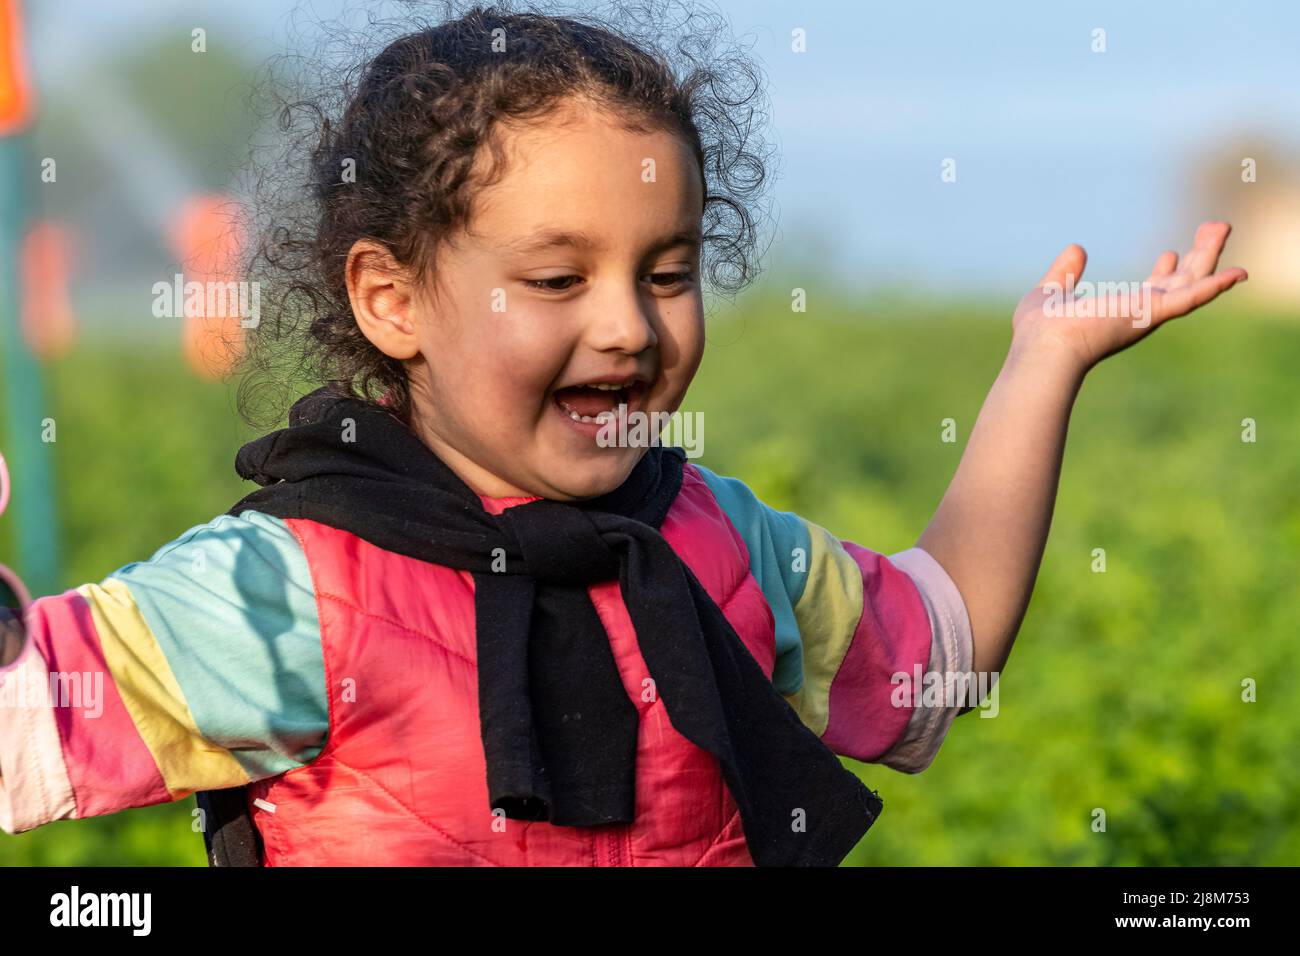 Selective focus shot of happy girl in pink outfit with black vest slung over her shoulder and open hands. Stock Photo